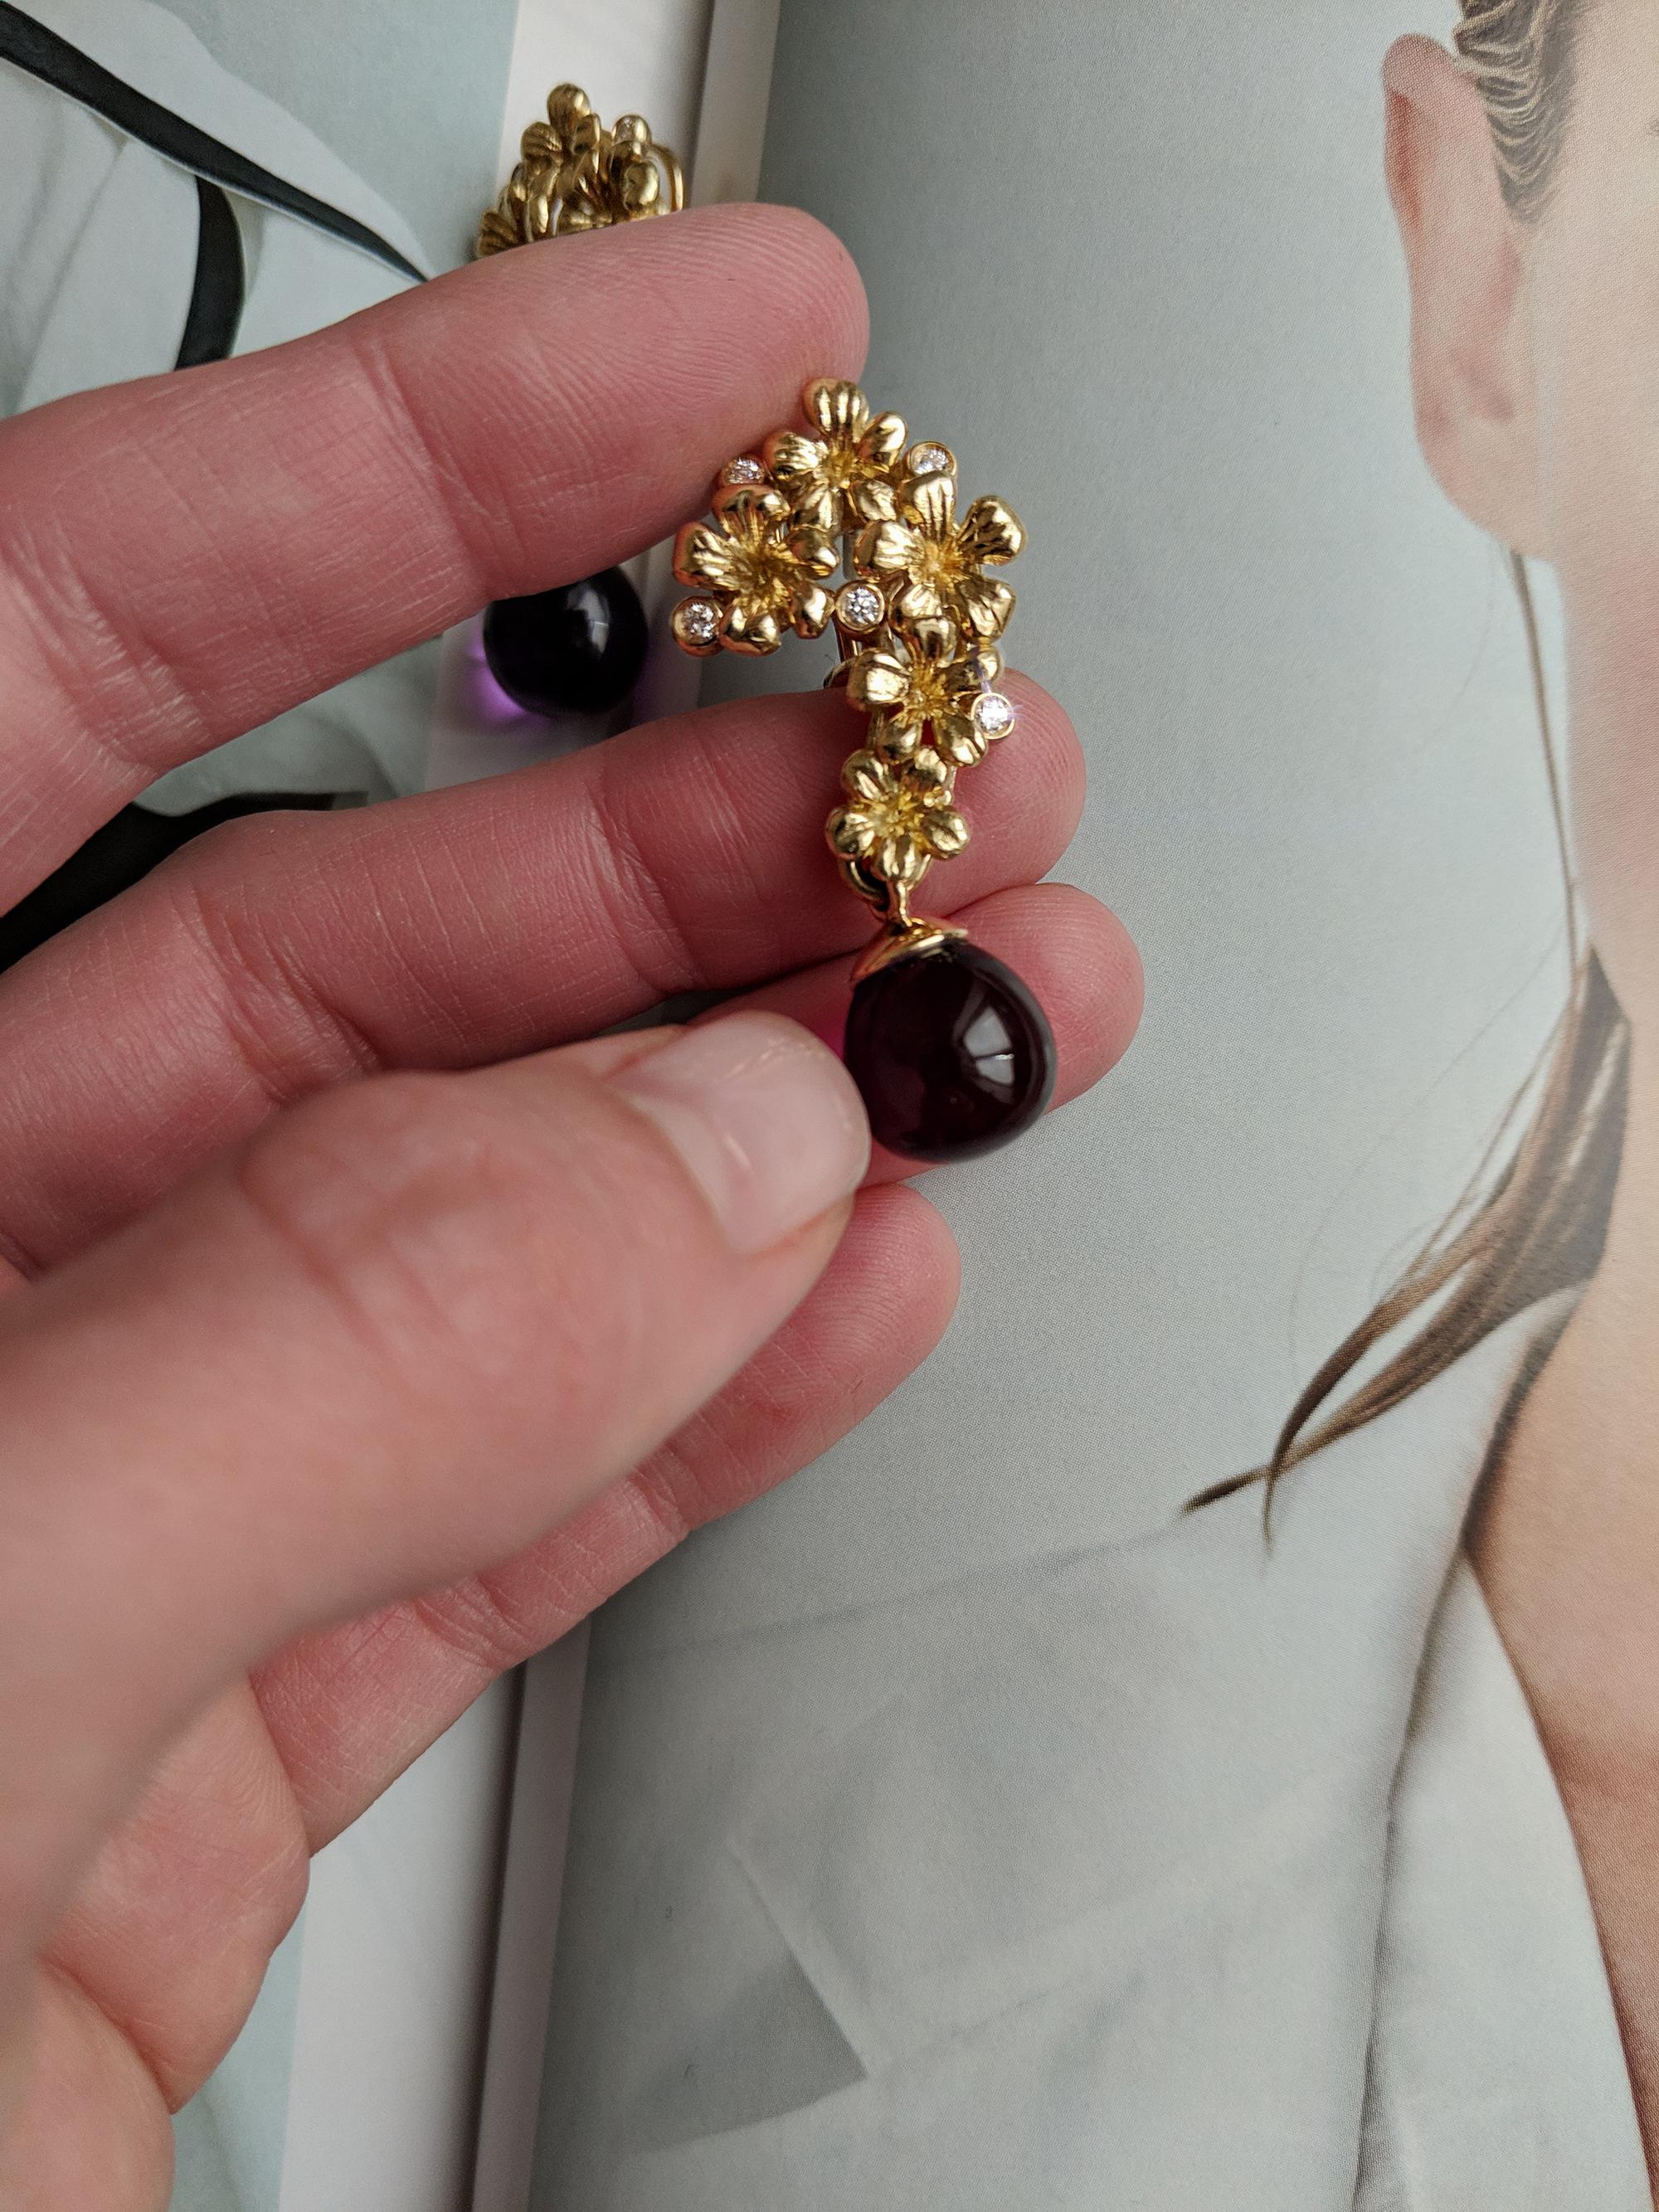 18 karat yellow gold Plum Blossom brooch with amethyst is encrusted with the 5 round diamonds. This contemporary jewellery collection has been featured in Vogue UA reviews. The cabochon amethyst is removable and exchangeable for the other stones